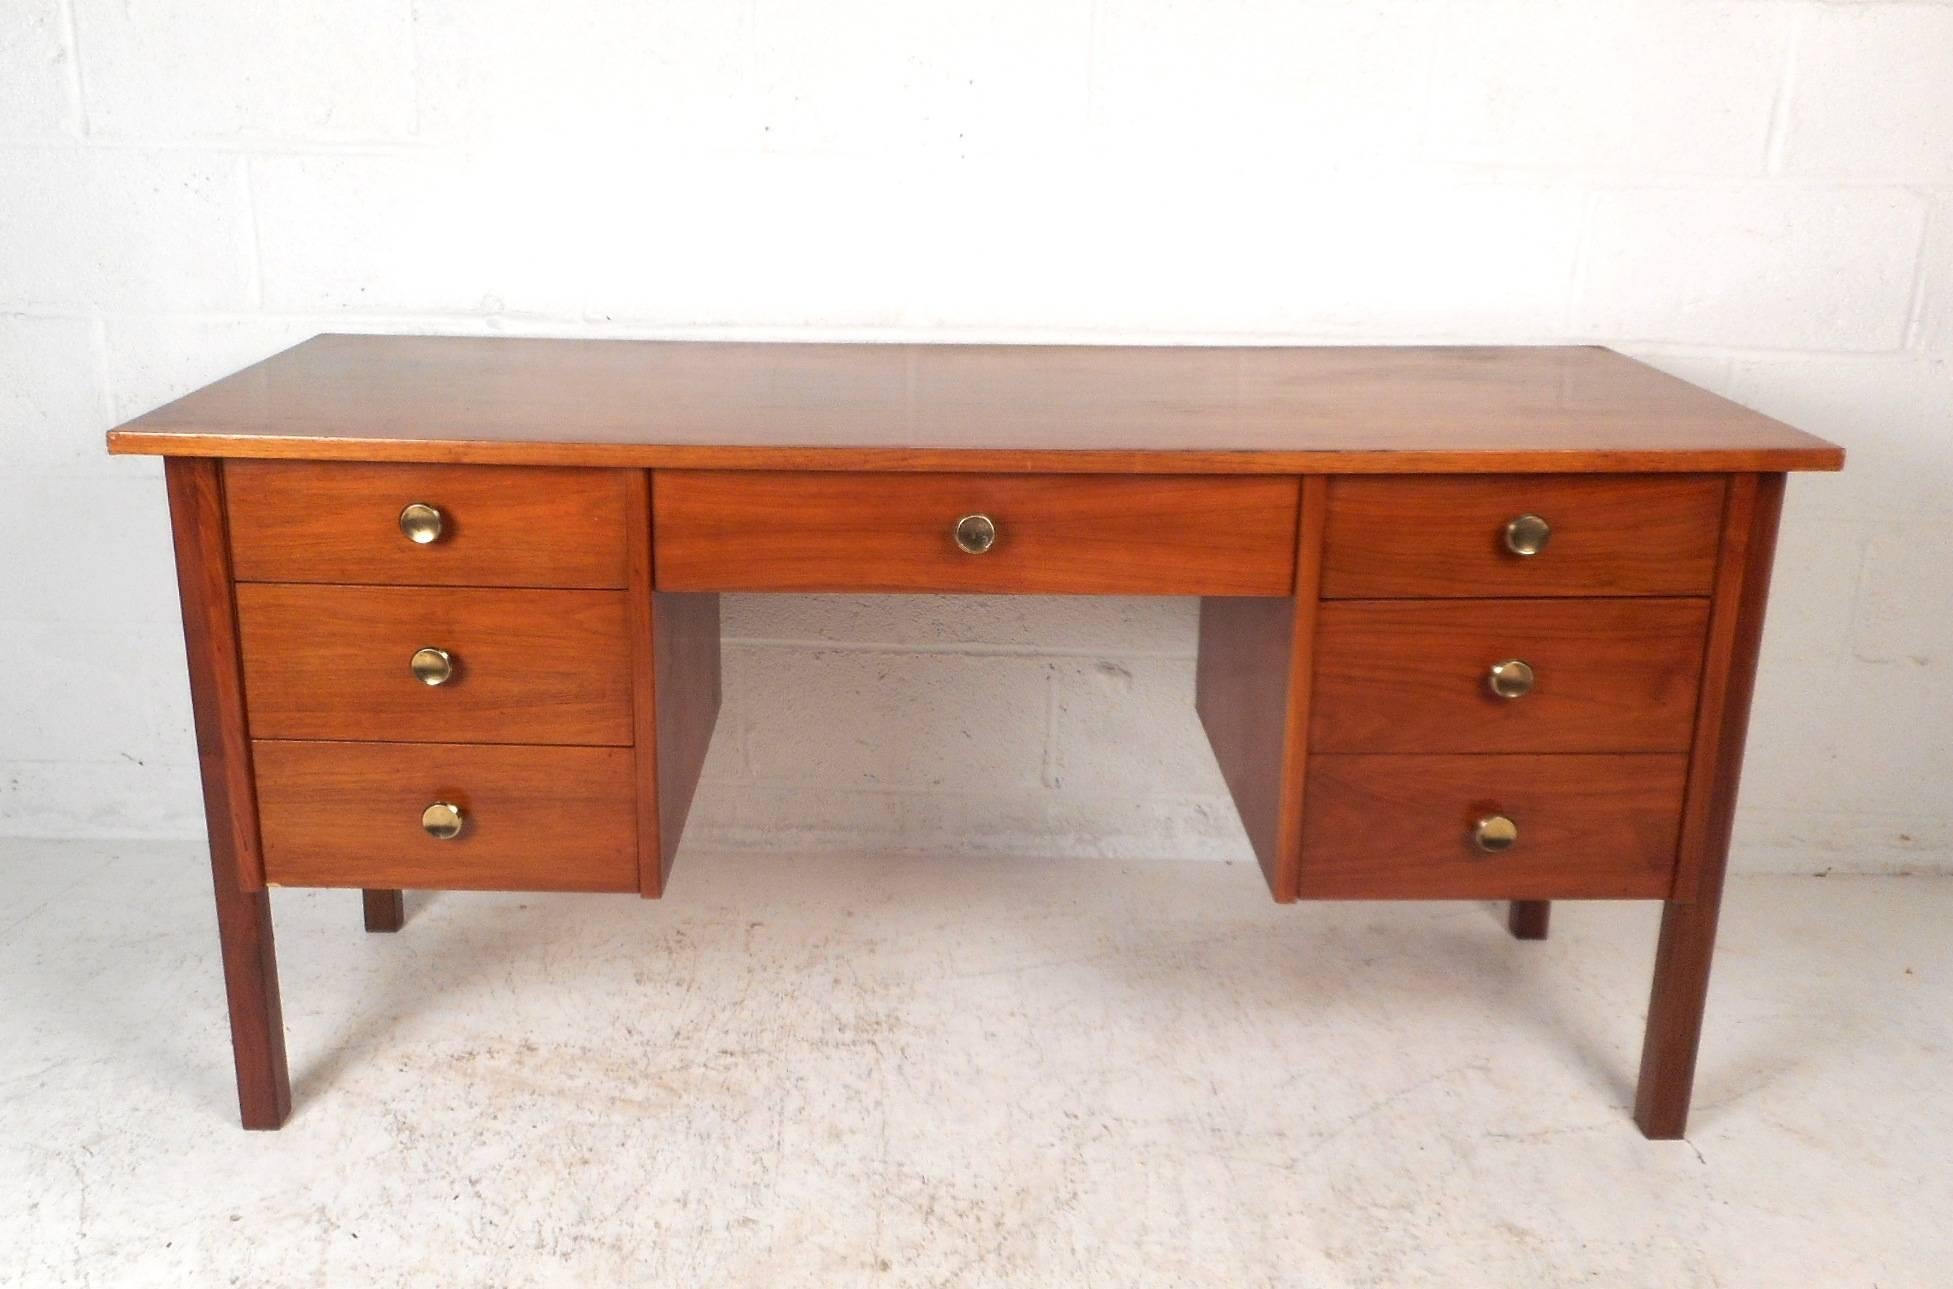 This gorgeous vintage modern desk features unusual circular metal pulls and an elegant walnut finish throughout. This impressive case piece offers plenty of room for storage within its seven drawers and ample work space on its 59.5 inch wide top.